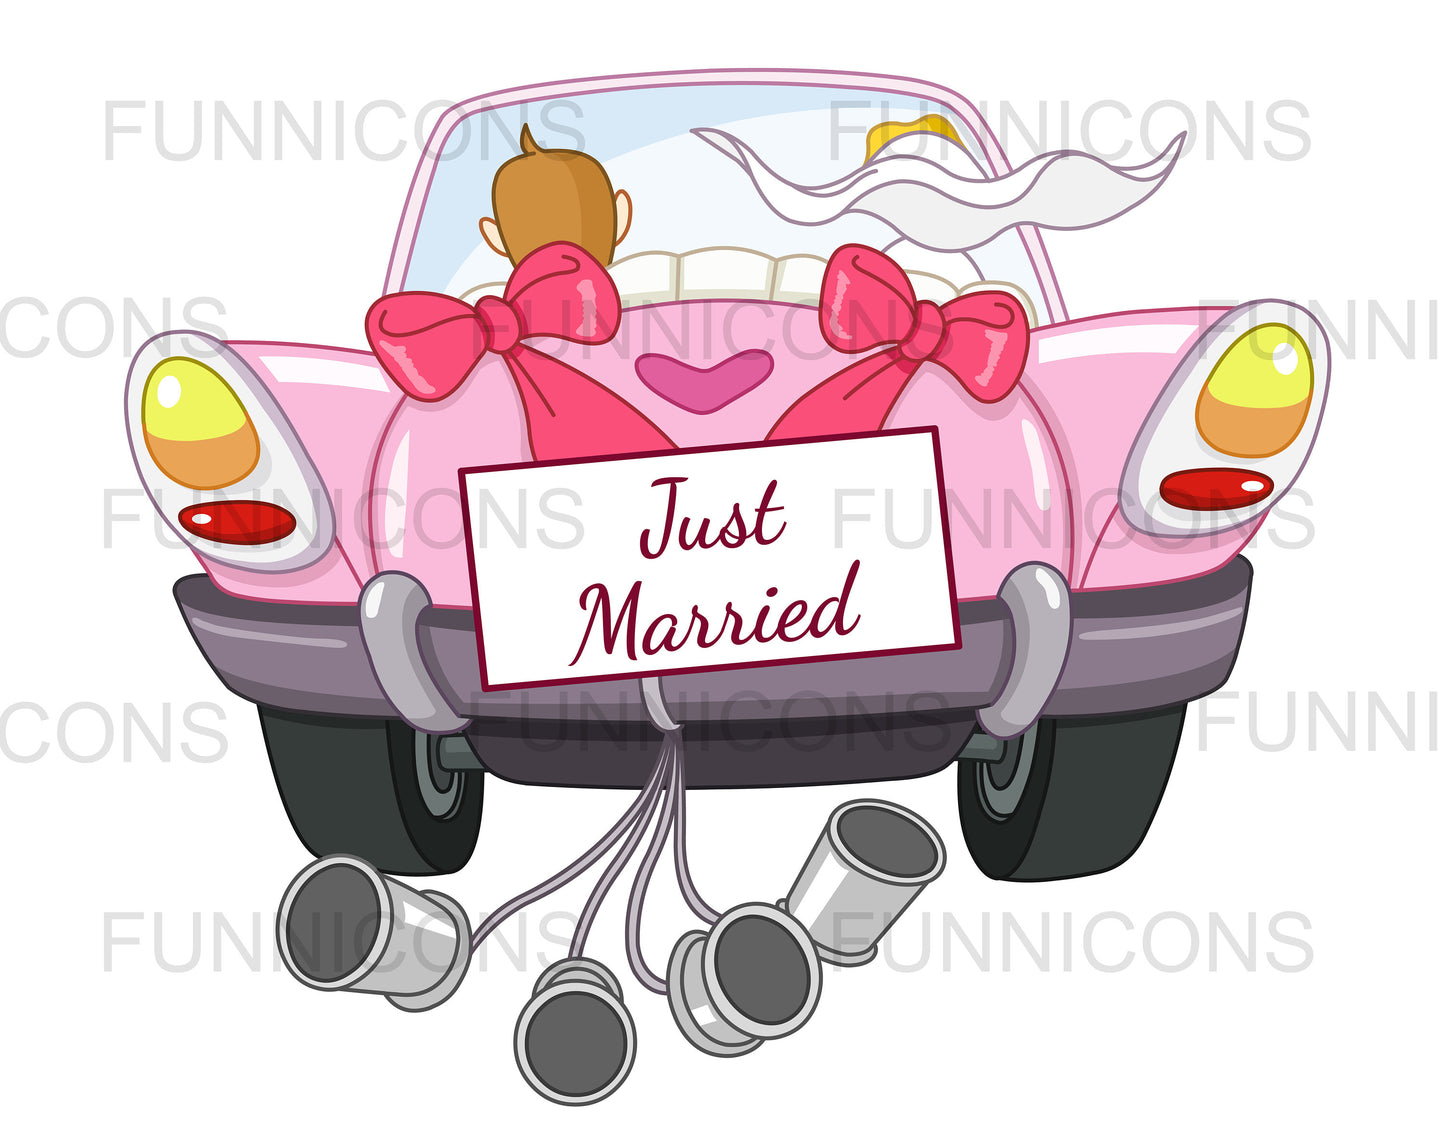 Just Married Sign and Cans on a Pink Car with Bride and Groom, Wedding Invitation